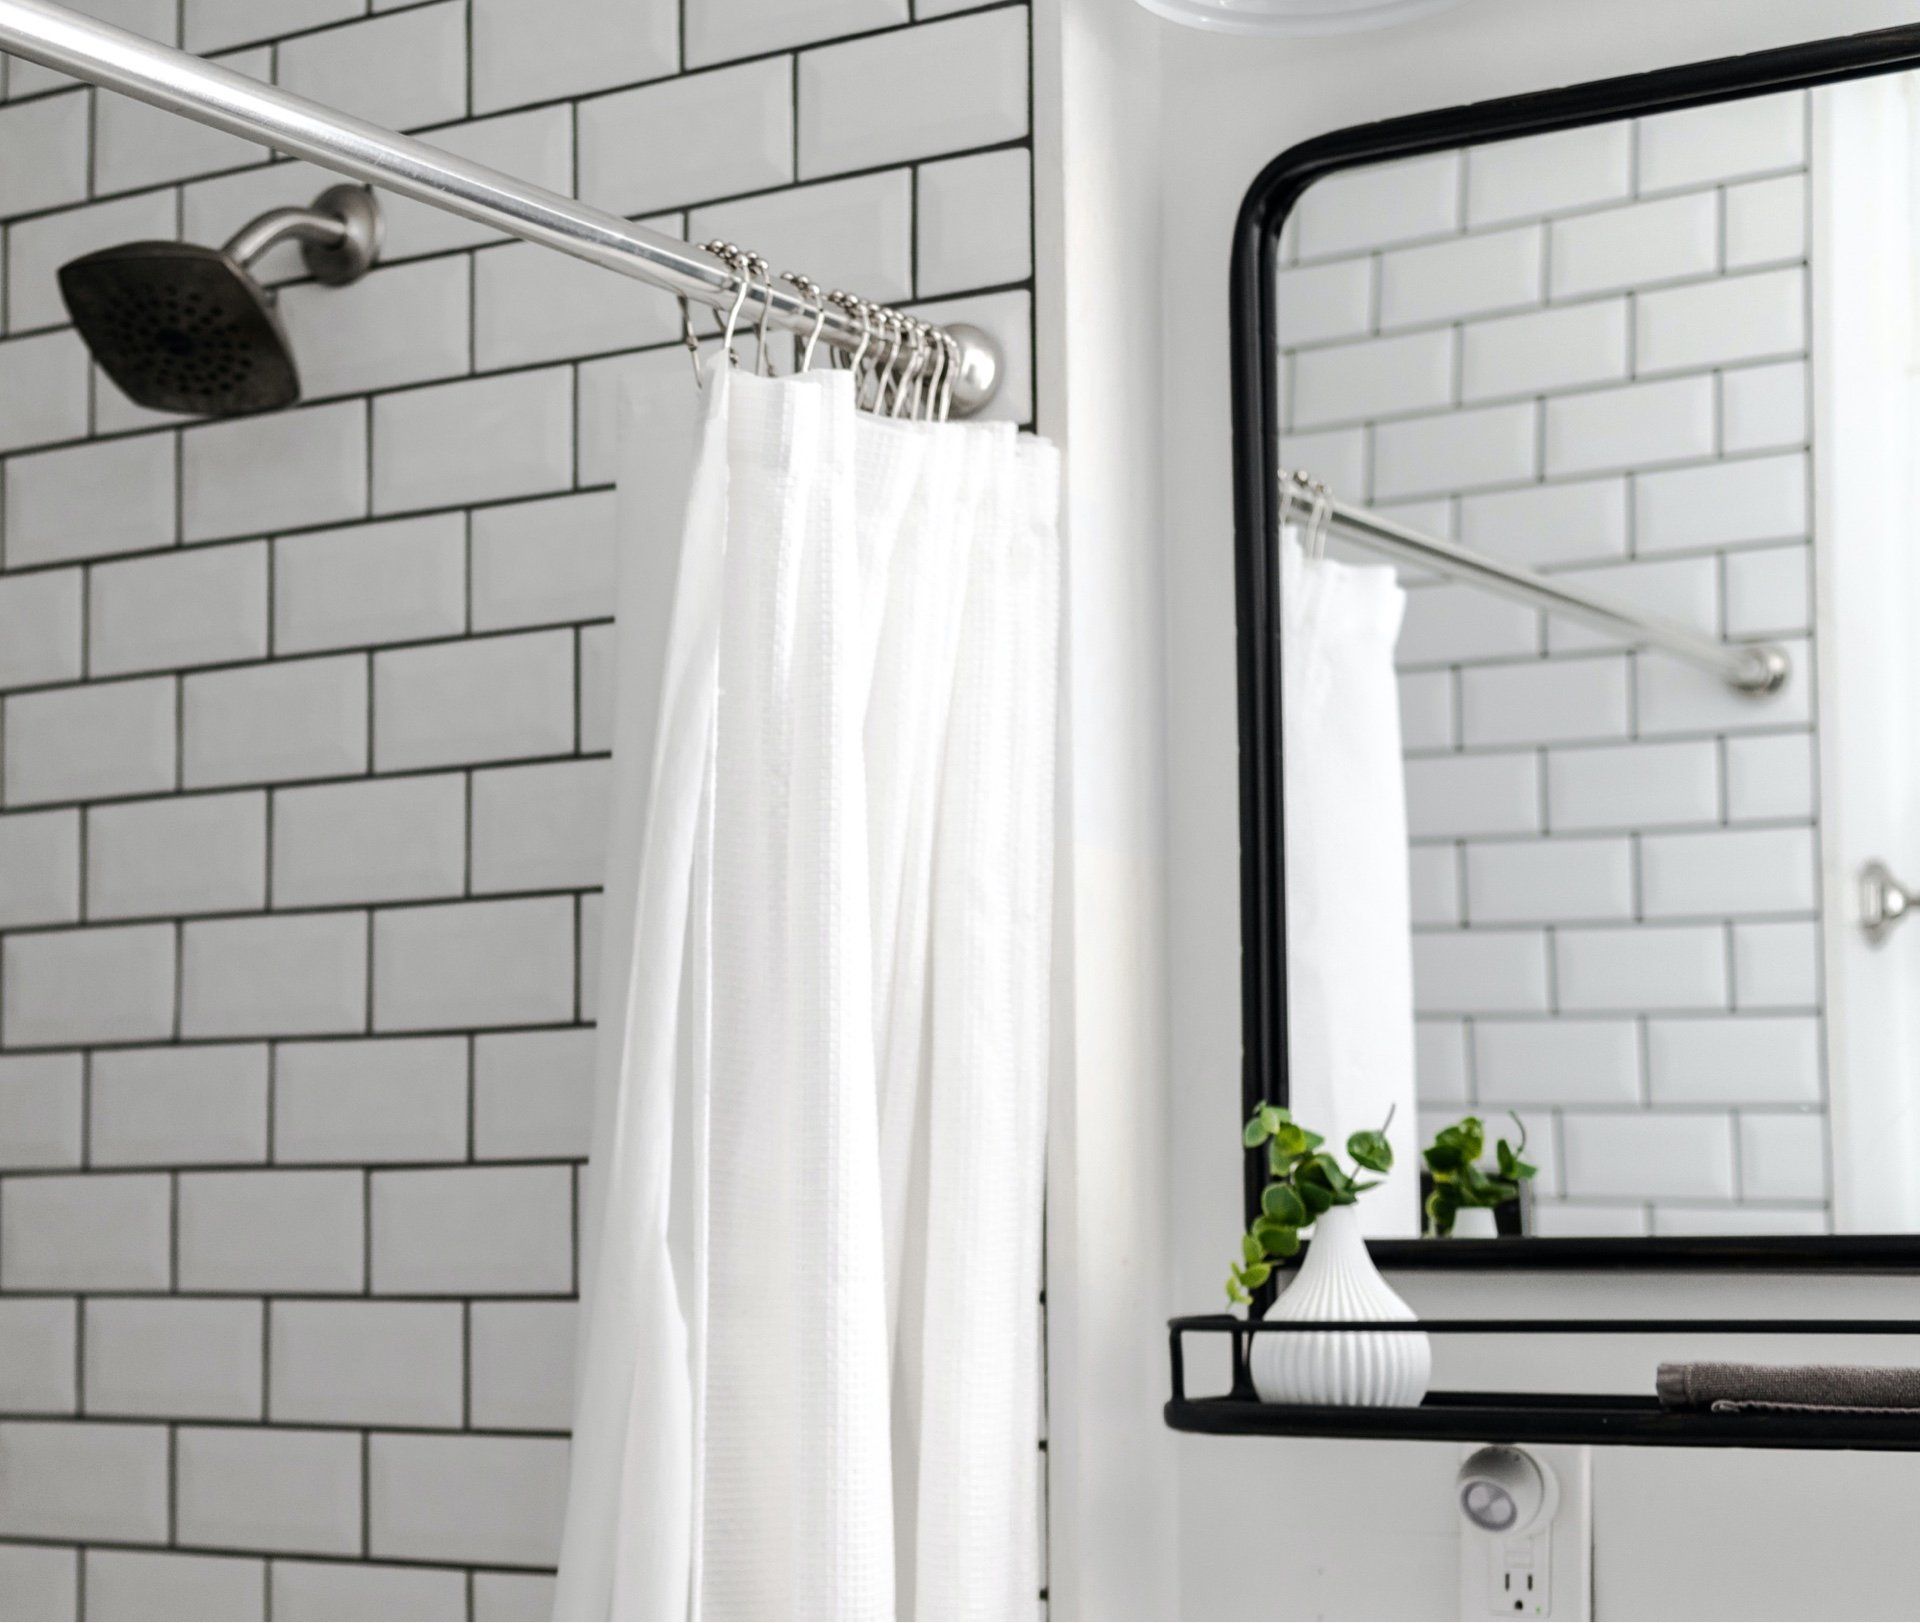 white tiled shower area with black mirror and white shower curtain on a silver rail